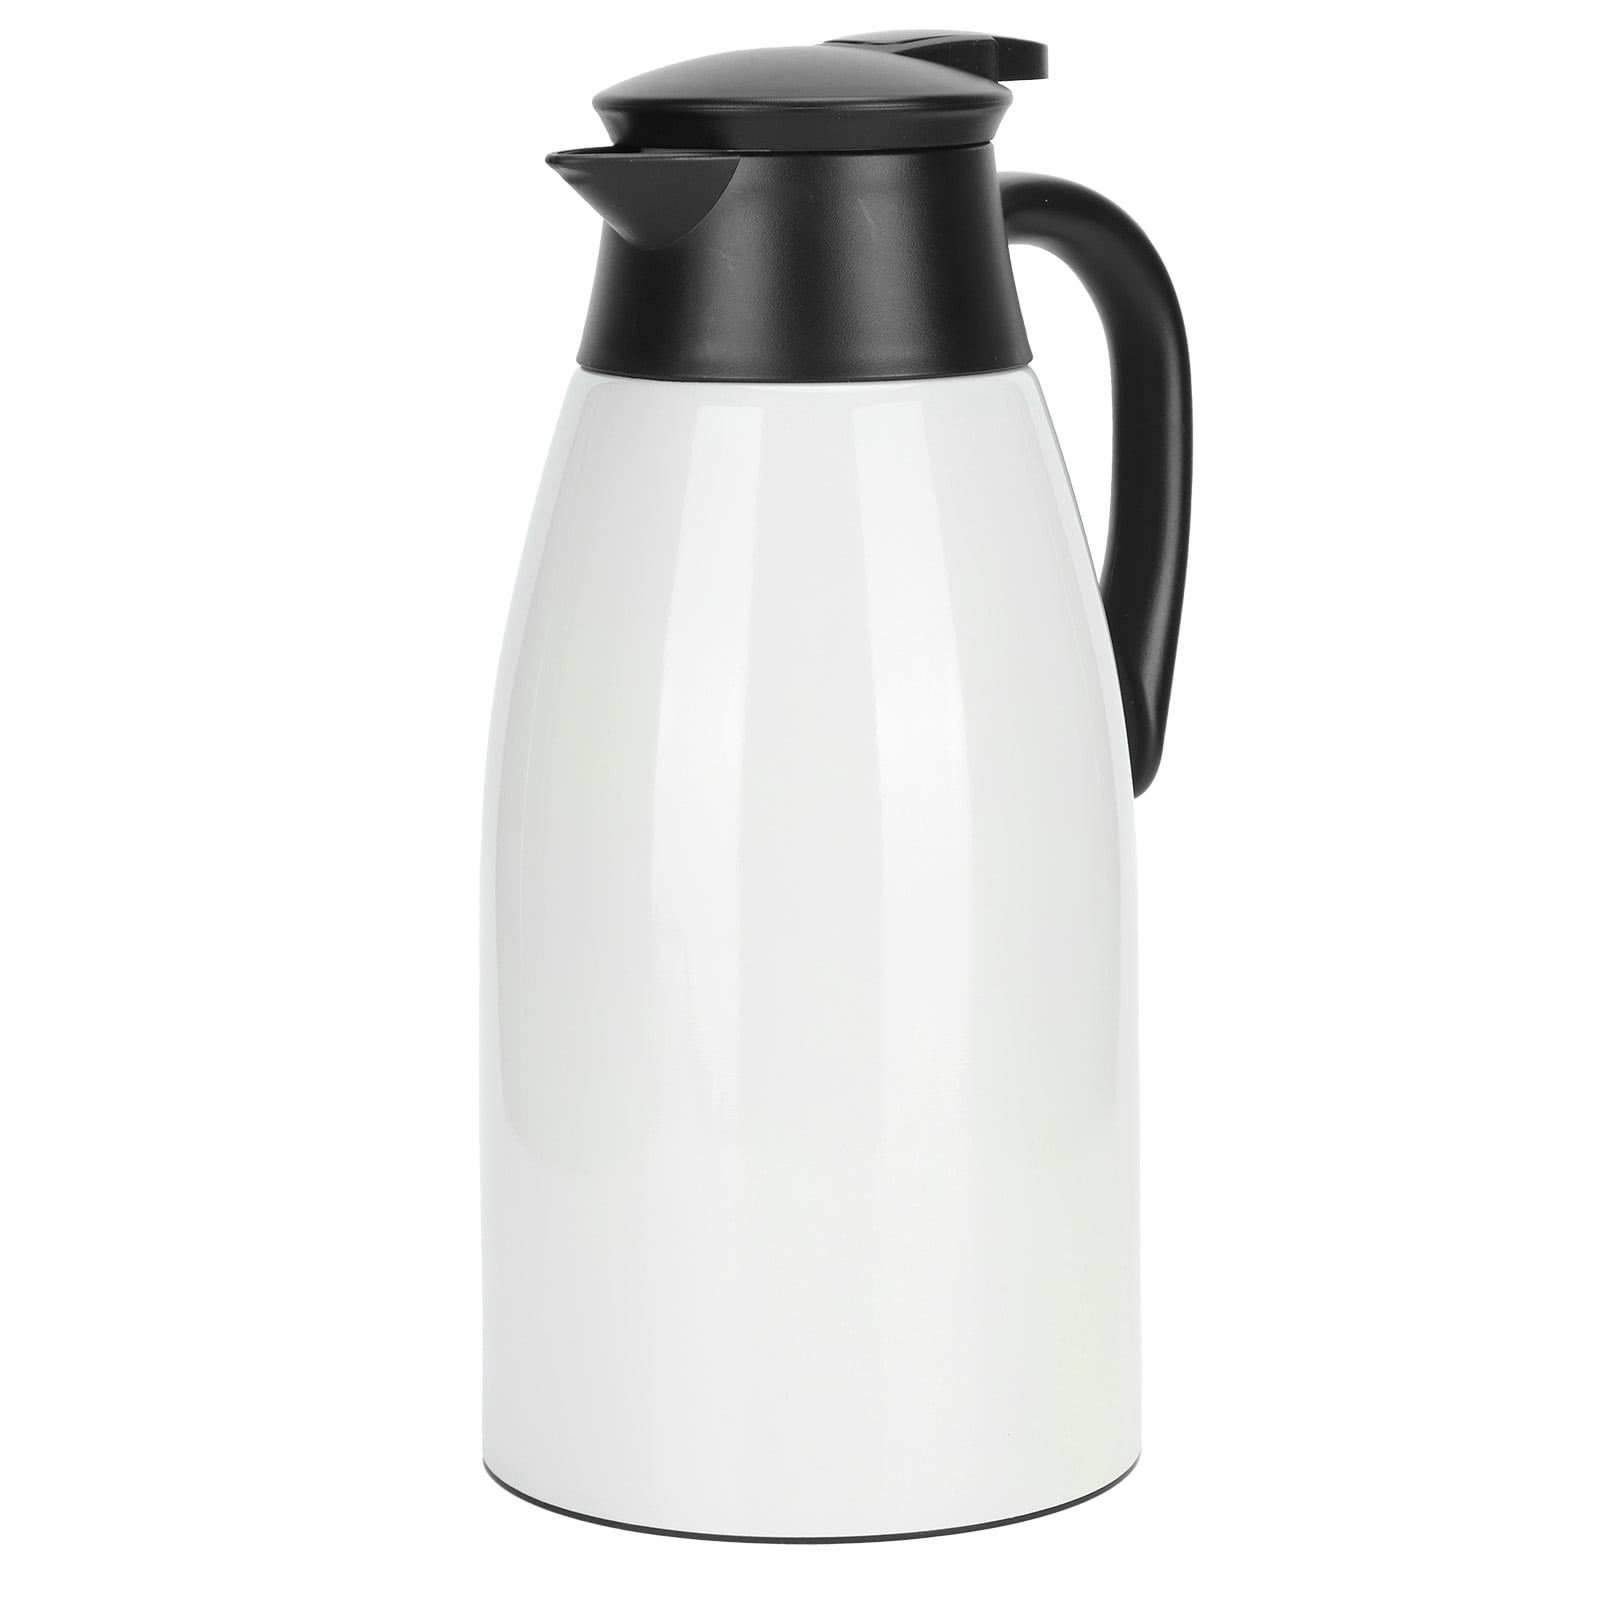 2L VACUUM JUG FLASK THERMAL HOT OR COLD COFFEE TEA INSULATED TRAVEL WHITE 